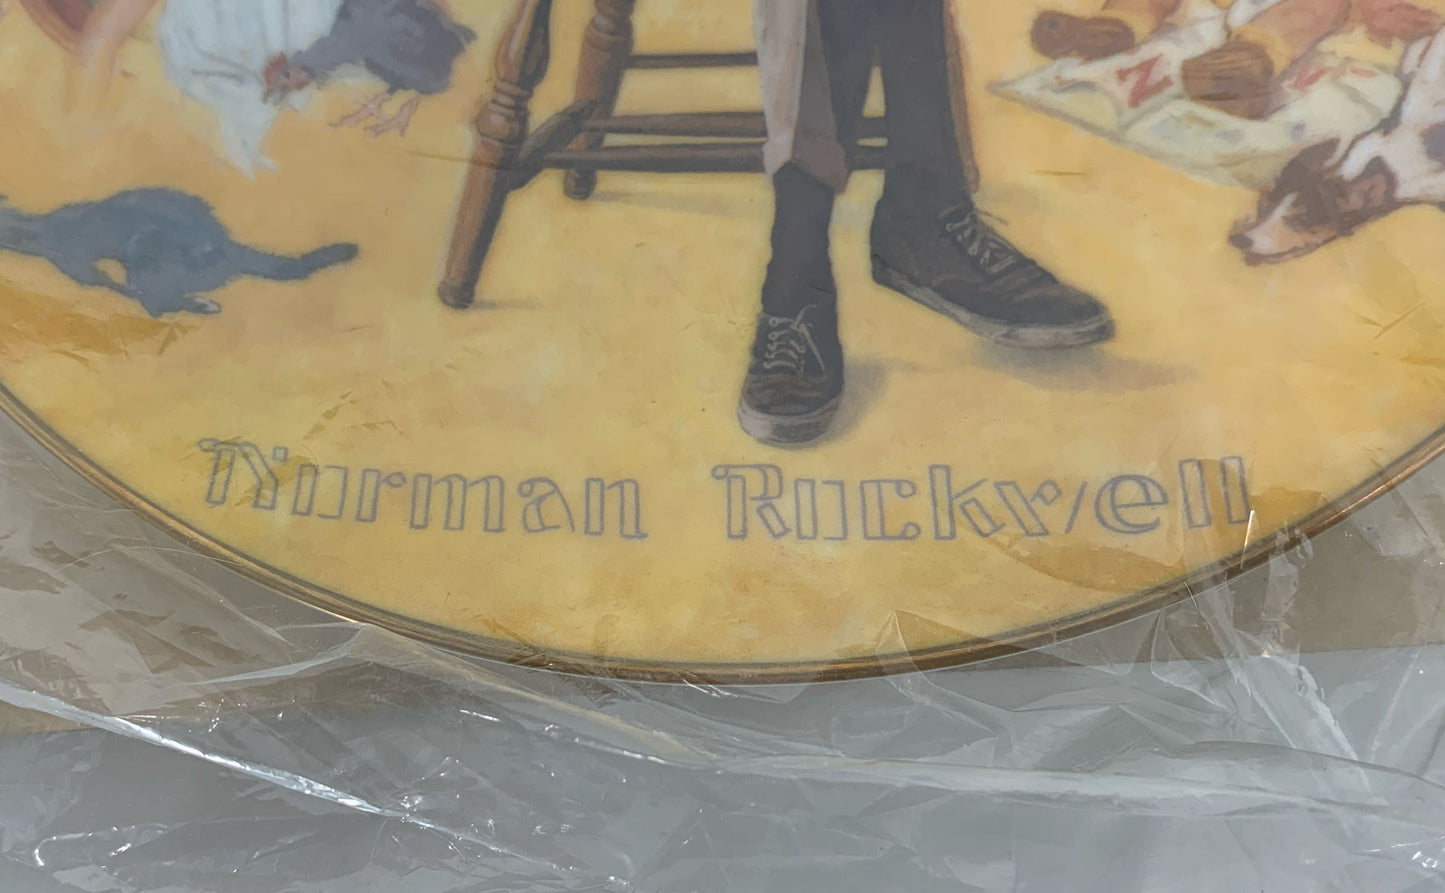 Vintage Norman Rockwell Remembered 1979 Limited Edition Commemorative Plate